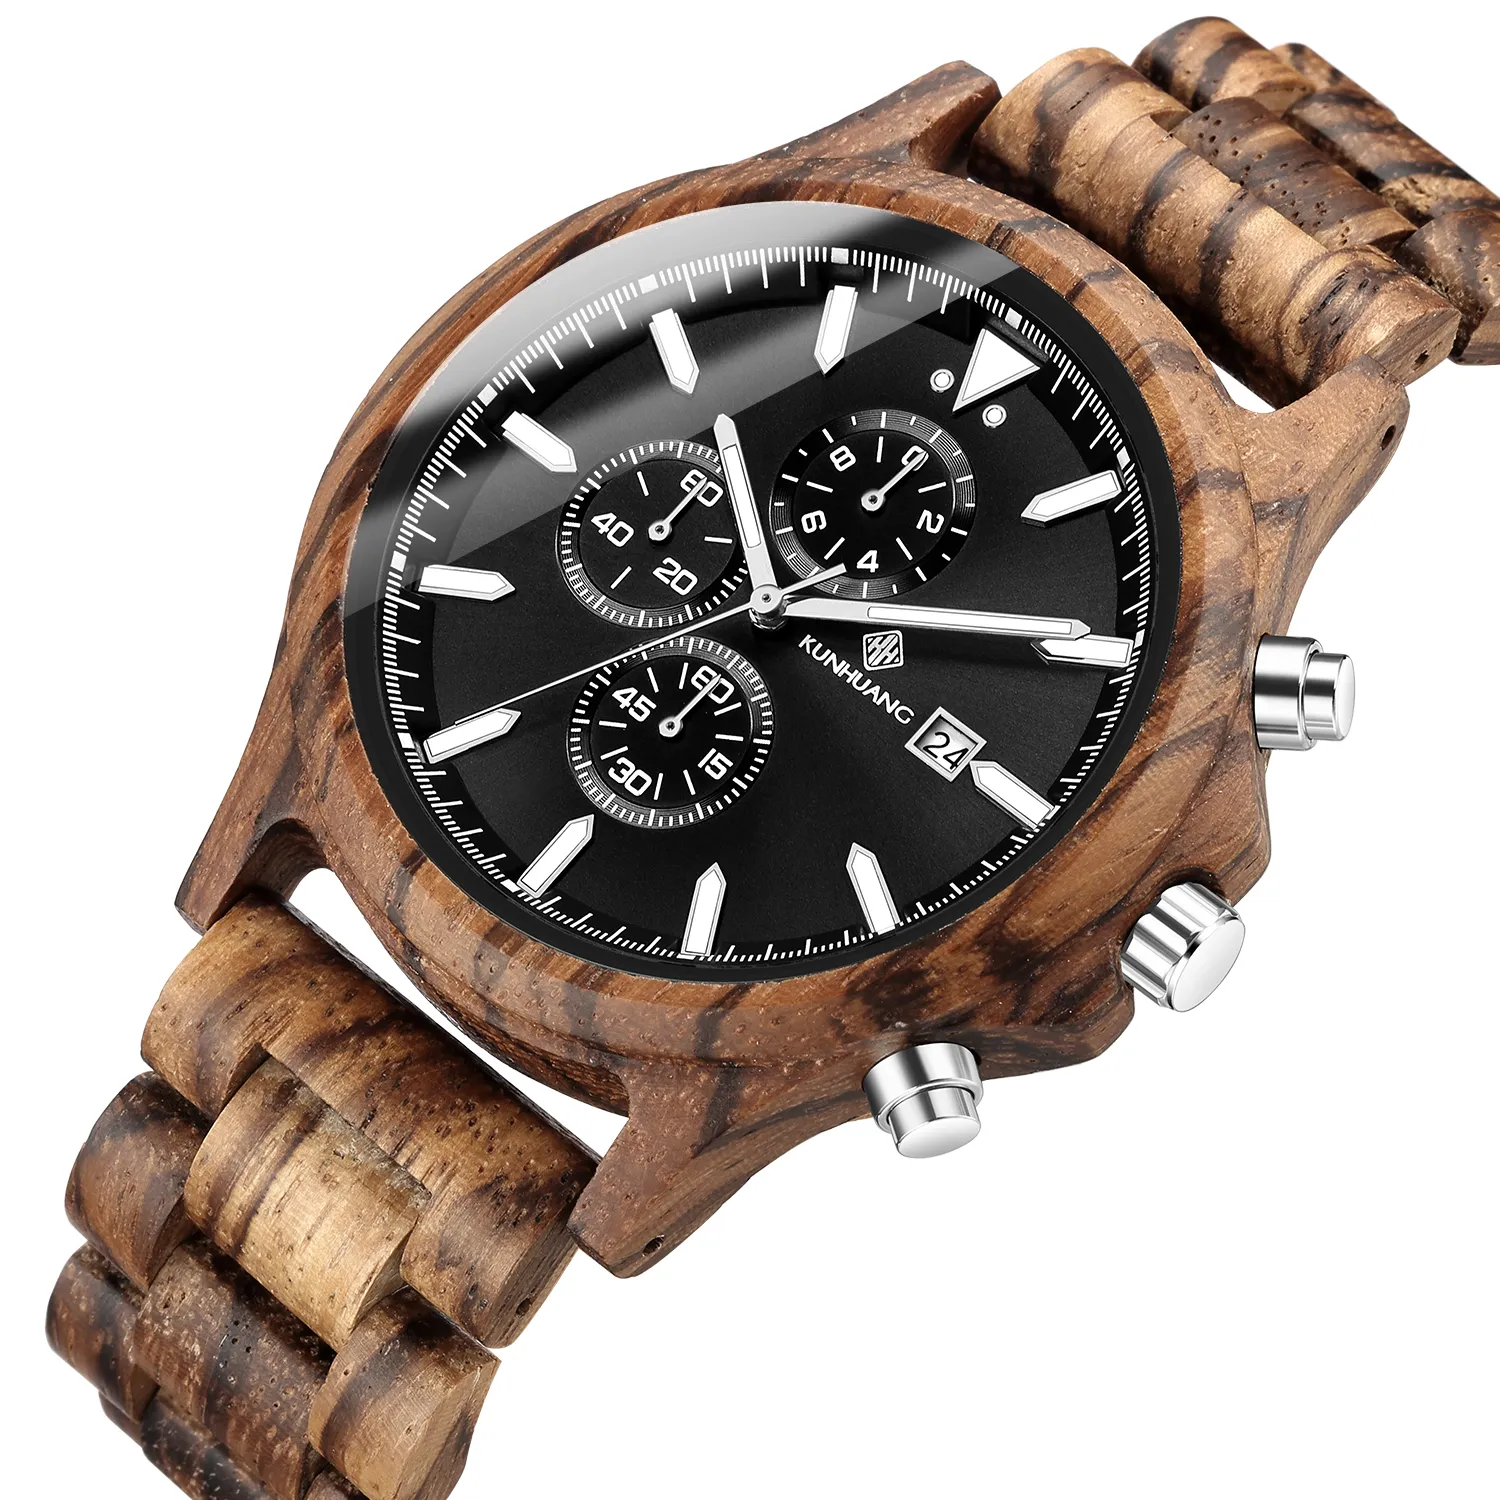 Men Wood Watch Chronograph Luxury Military Sport Watches Stylish Casual Personalized Wood Quartz Watches267m